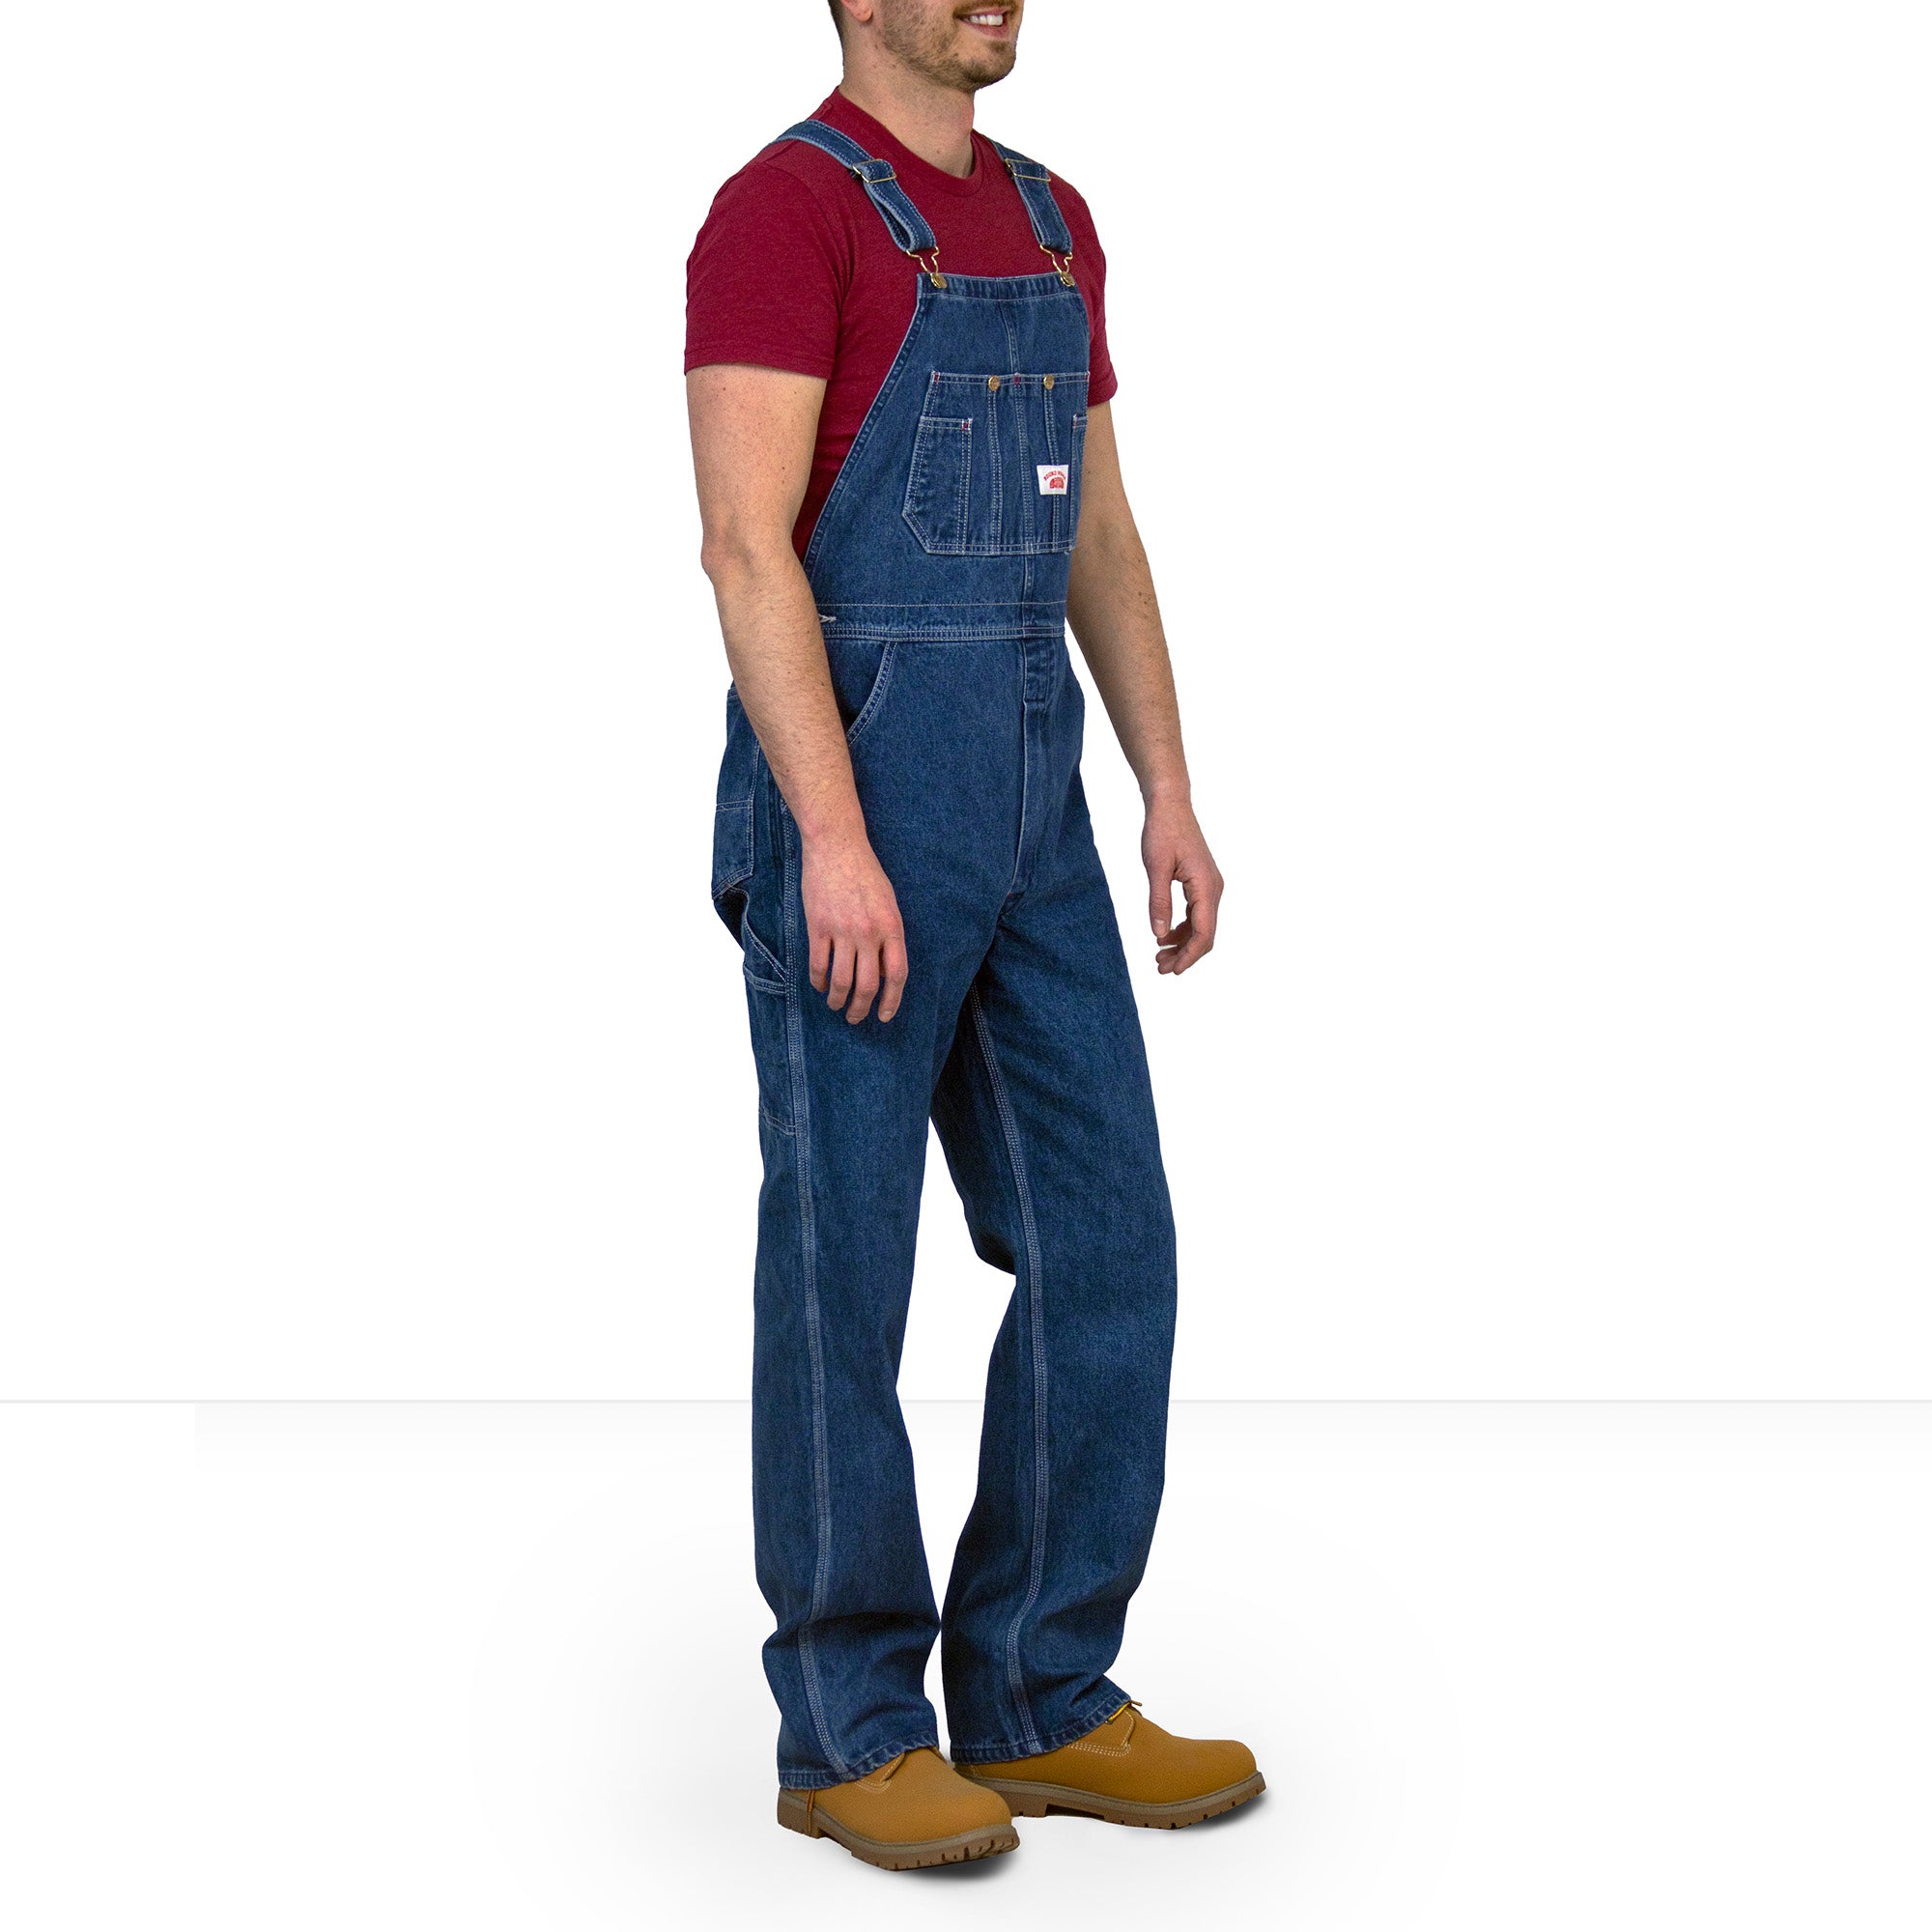 699 Round House Made in USA Stone Washed Blue Denim Overalls